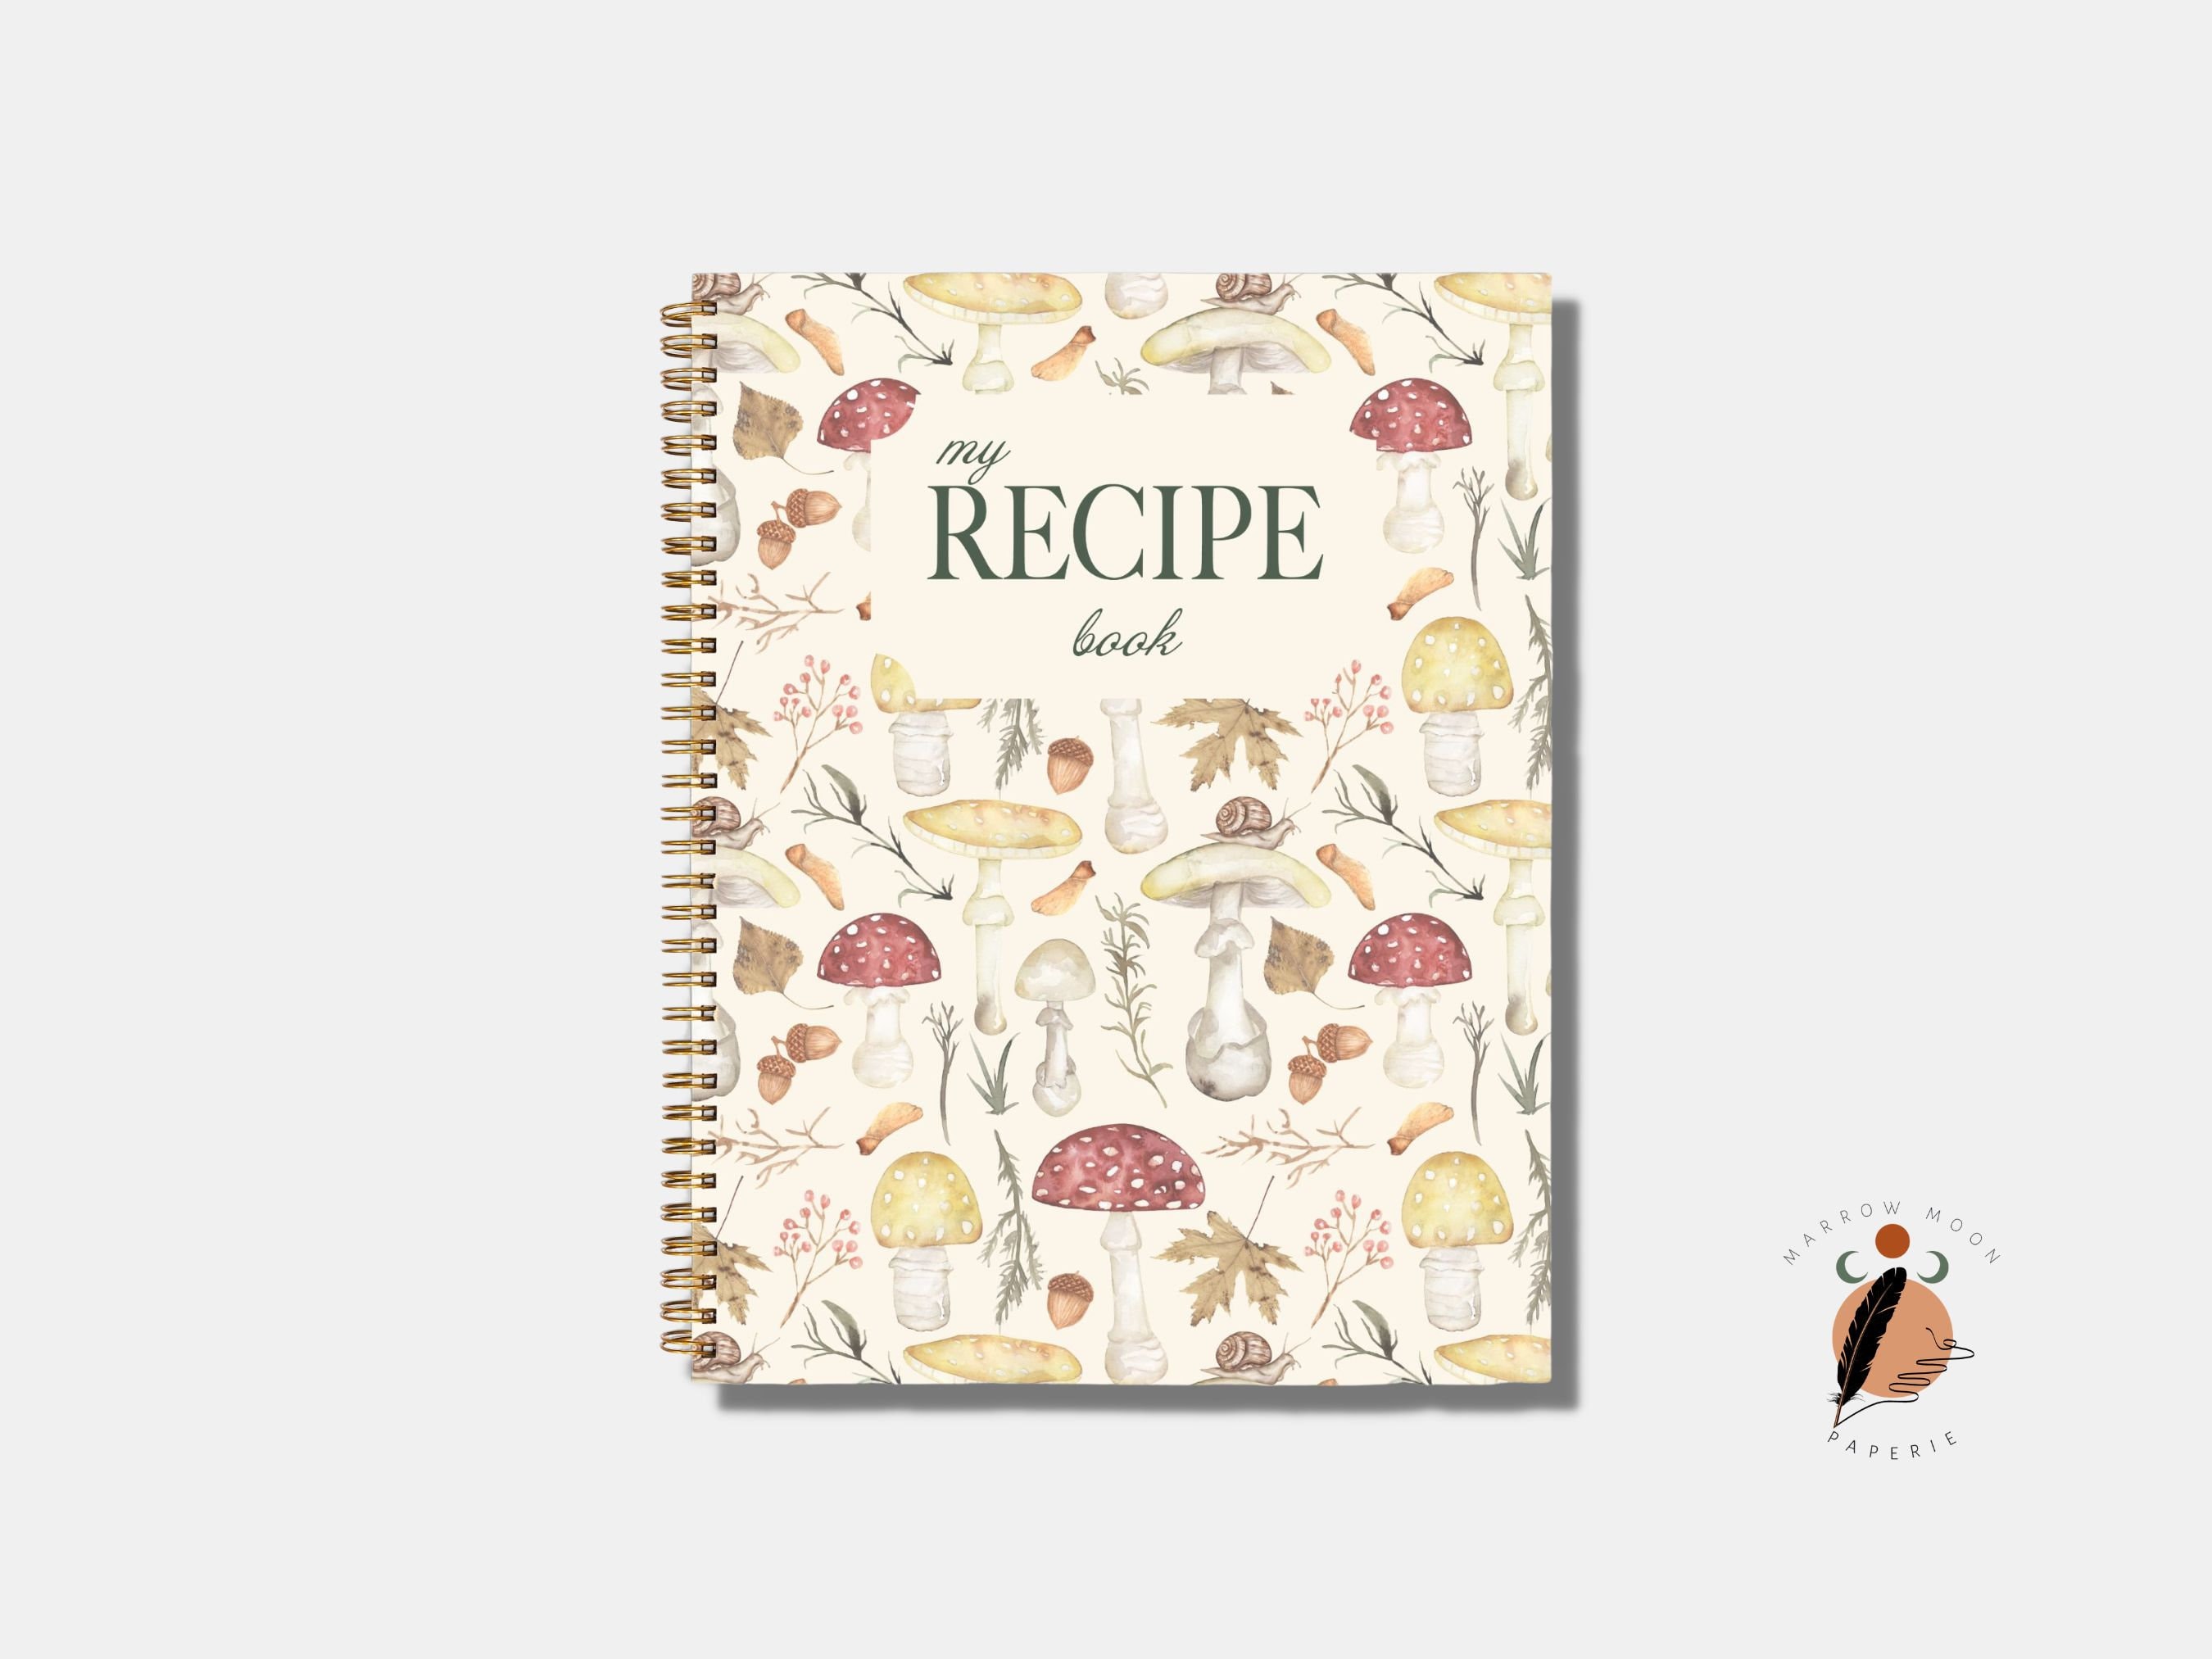 JUBTIC Recipe Book to Write in Your Own Recipes,Sprial Hardcover Personal  Blank Recipe Book, Make Your Own Family Cookbook with Gold Foil Stickers